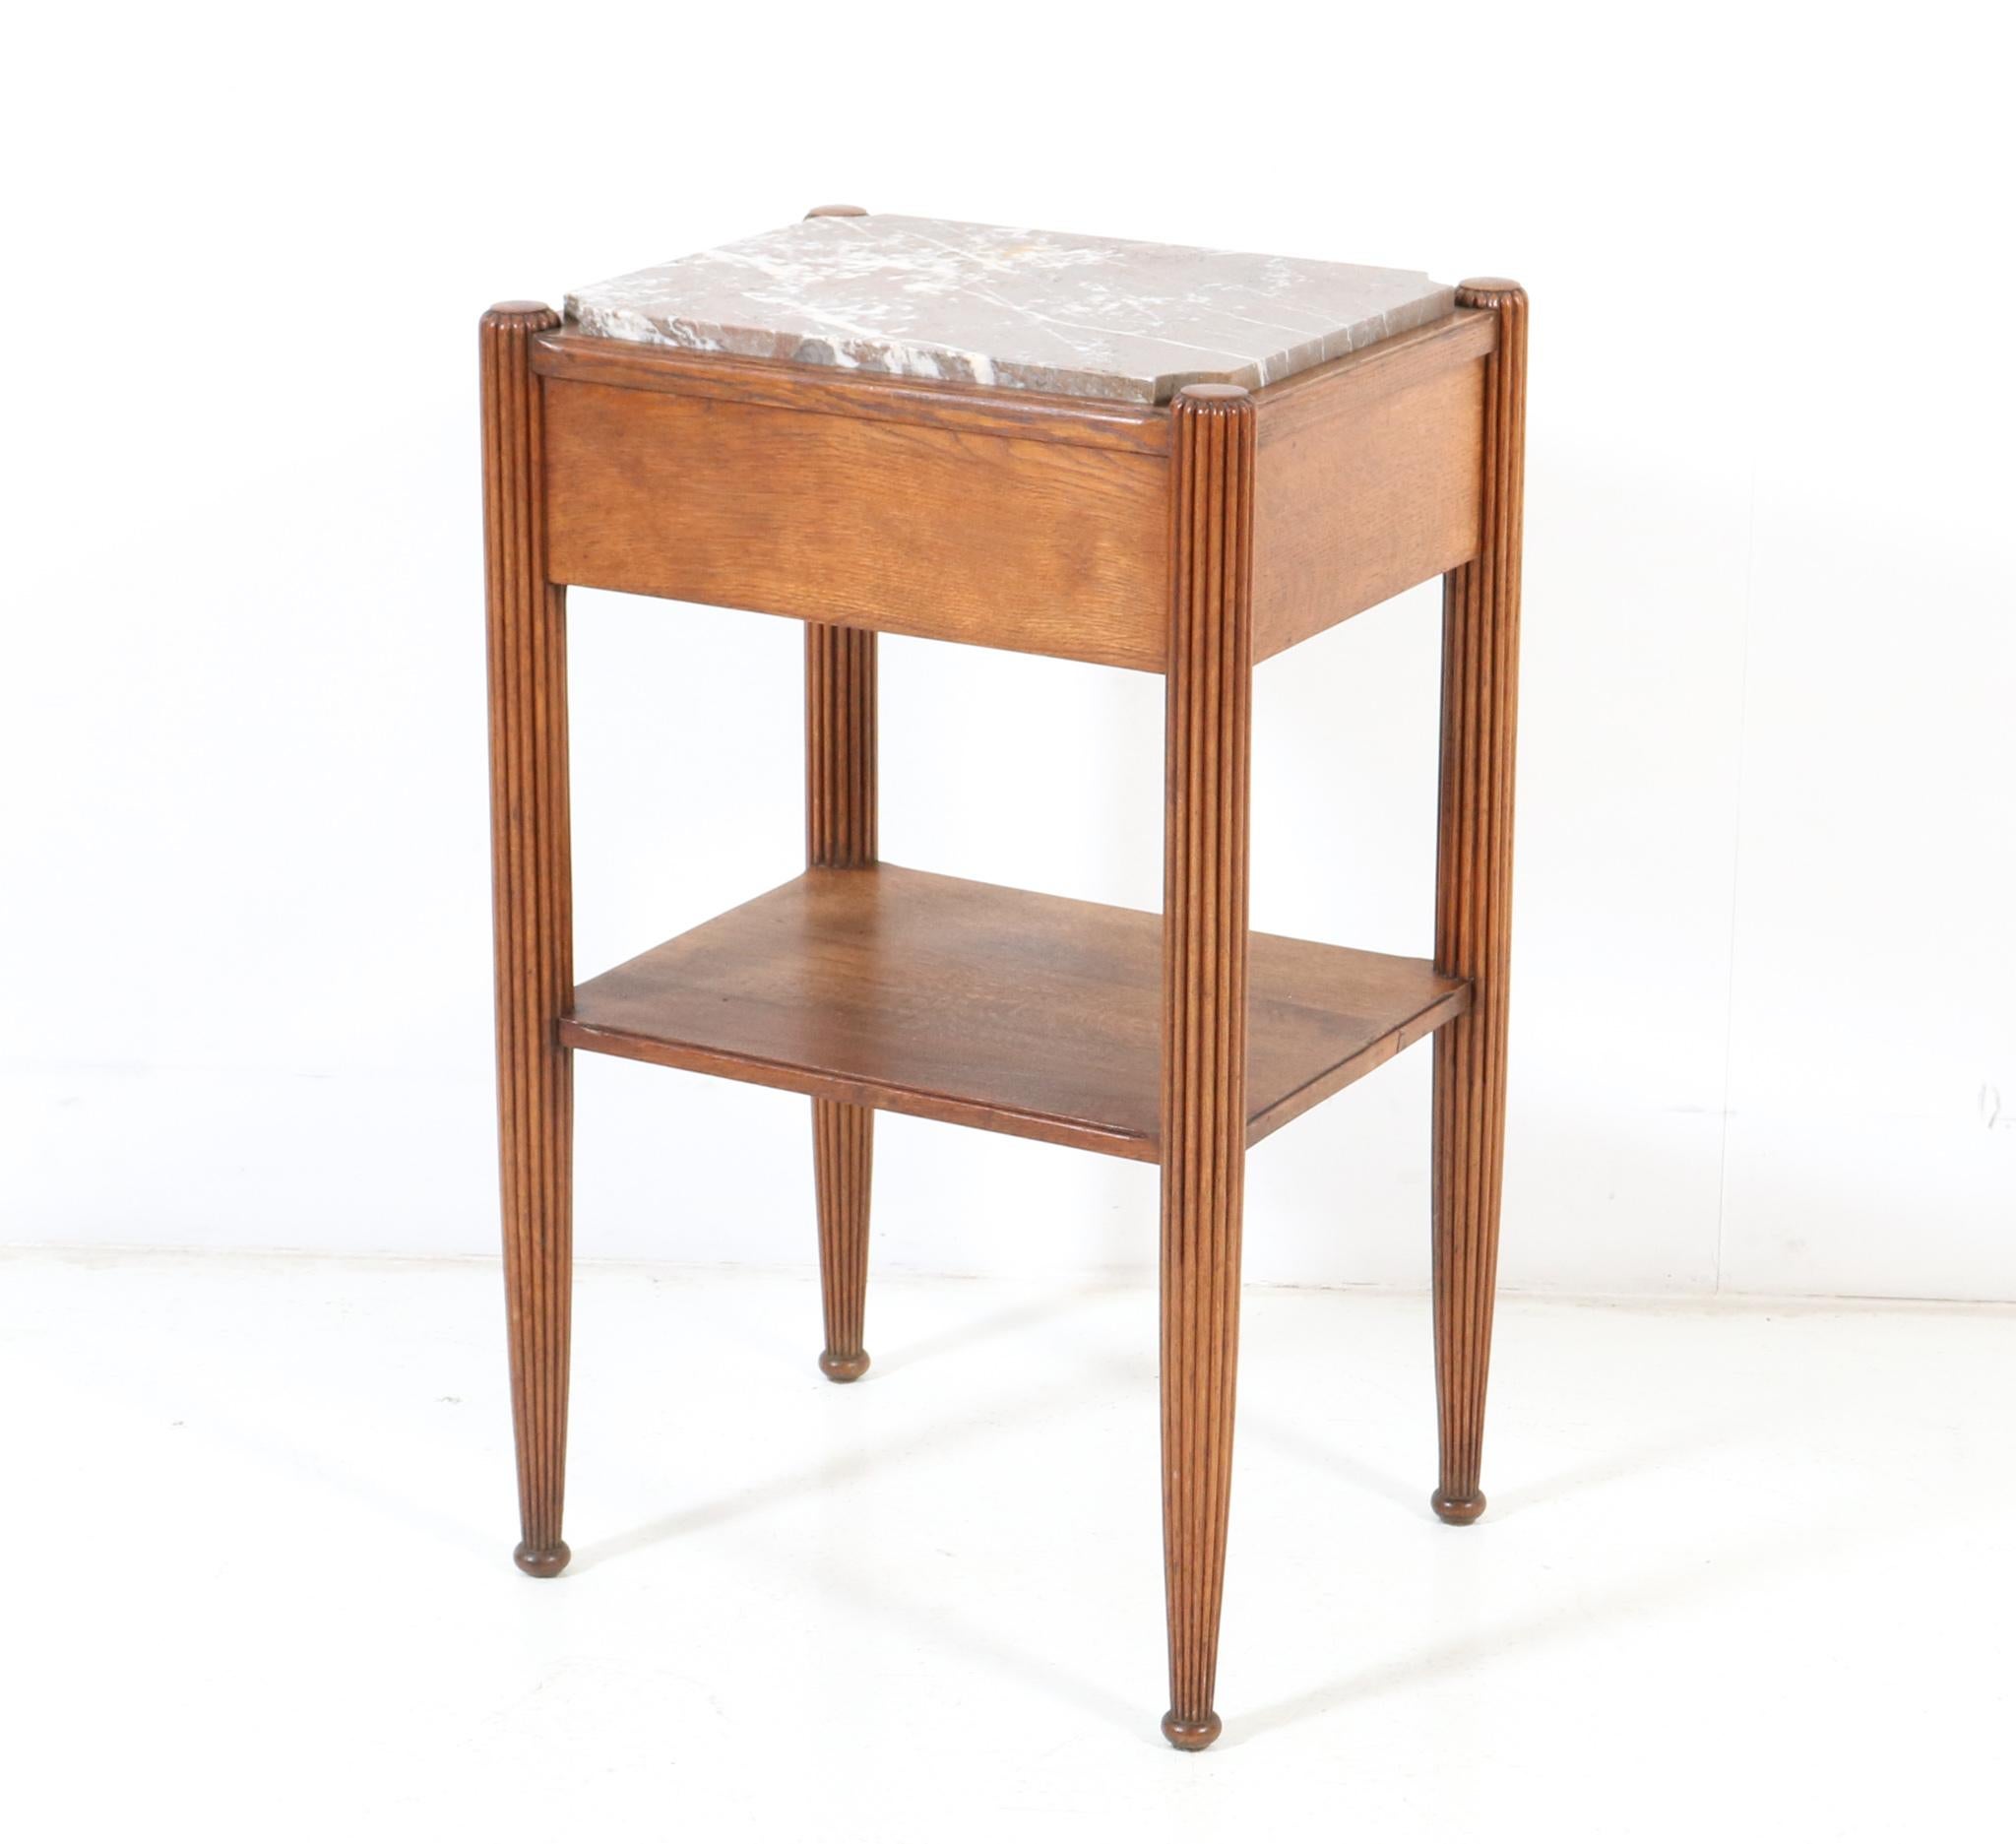 Brass Oak Art Deco Side Table with Marble Top, 1930s For Sale